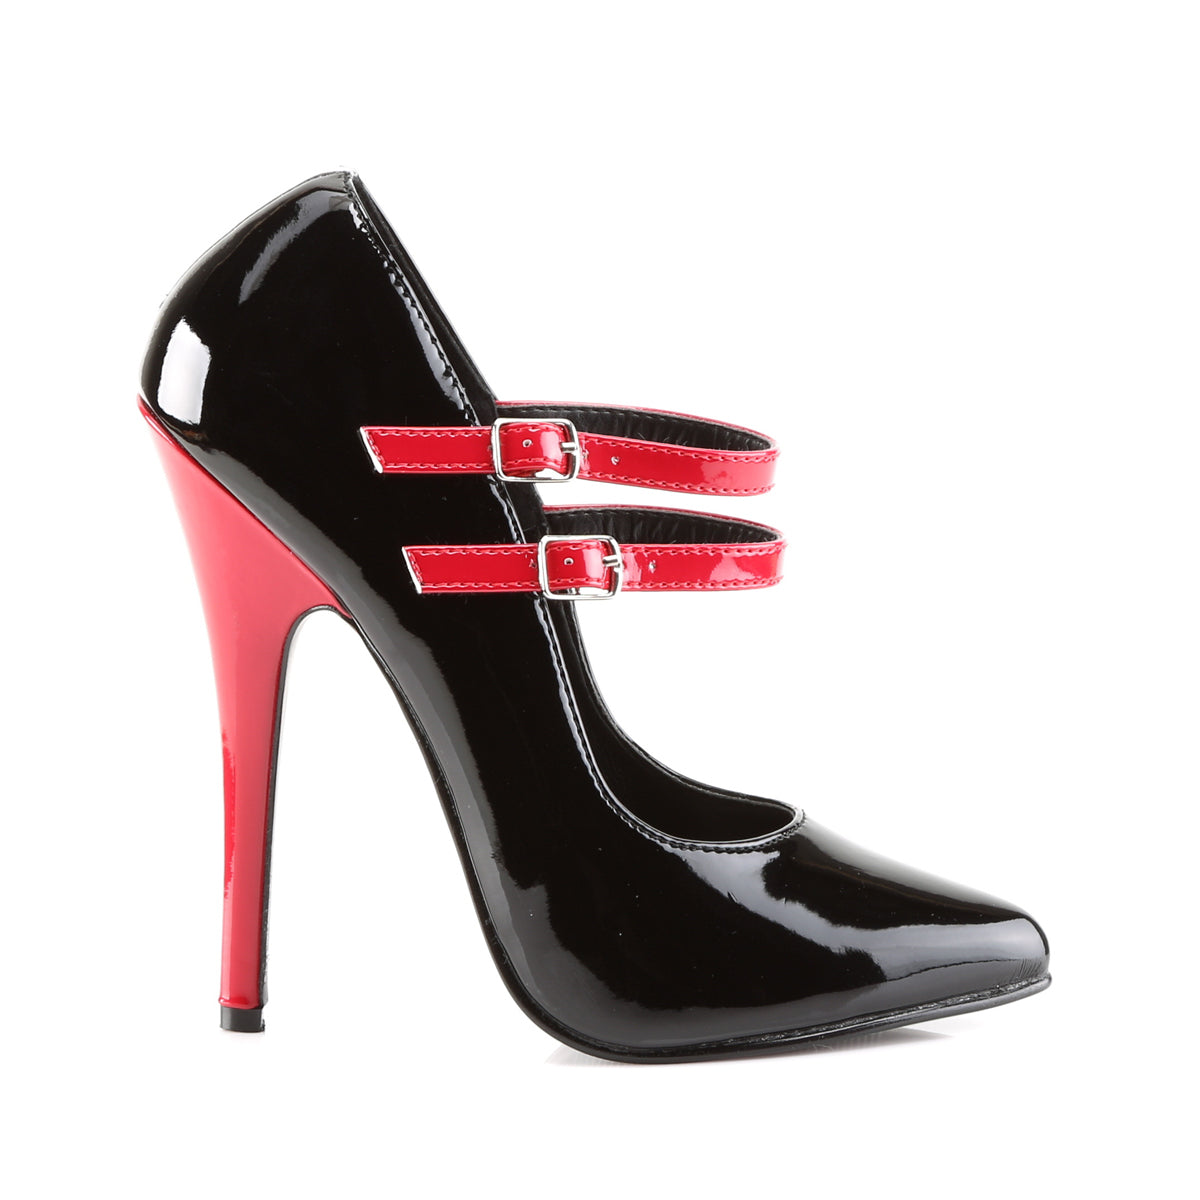 DOMINA 442 Devious Fetish Shoes 6" Heel Black and Red Shoes Devious Heels Fetish Heels